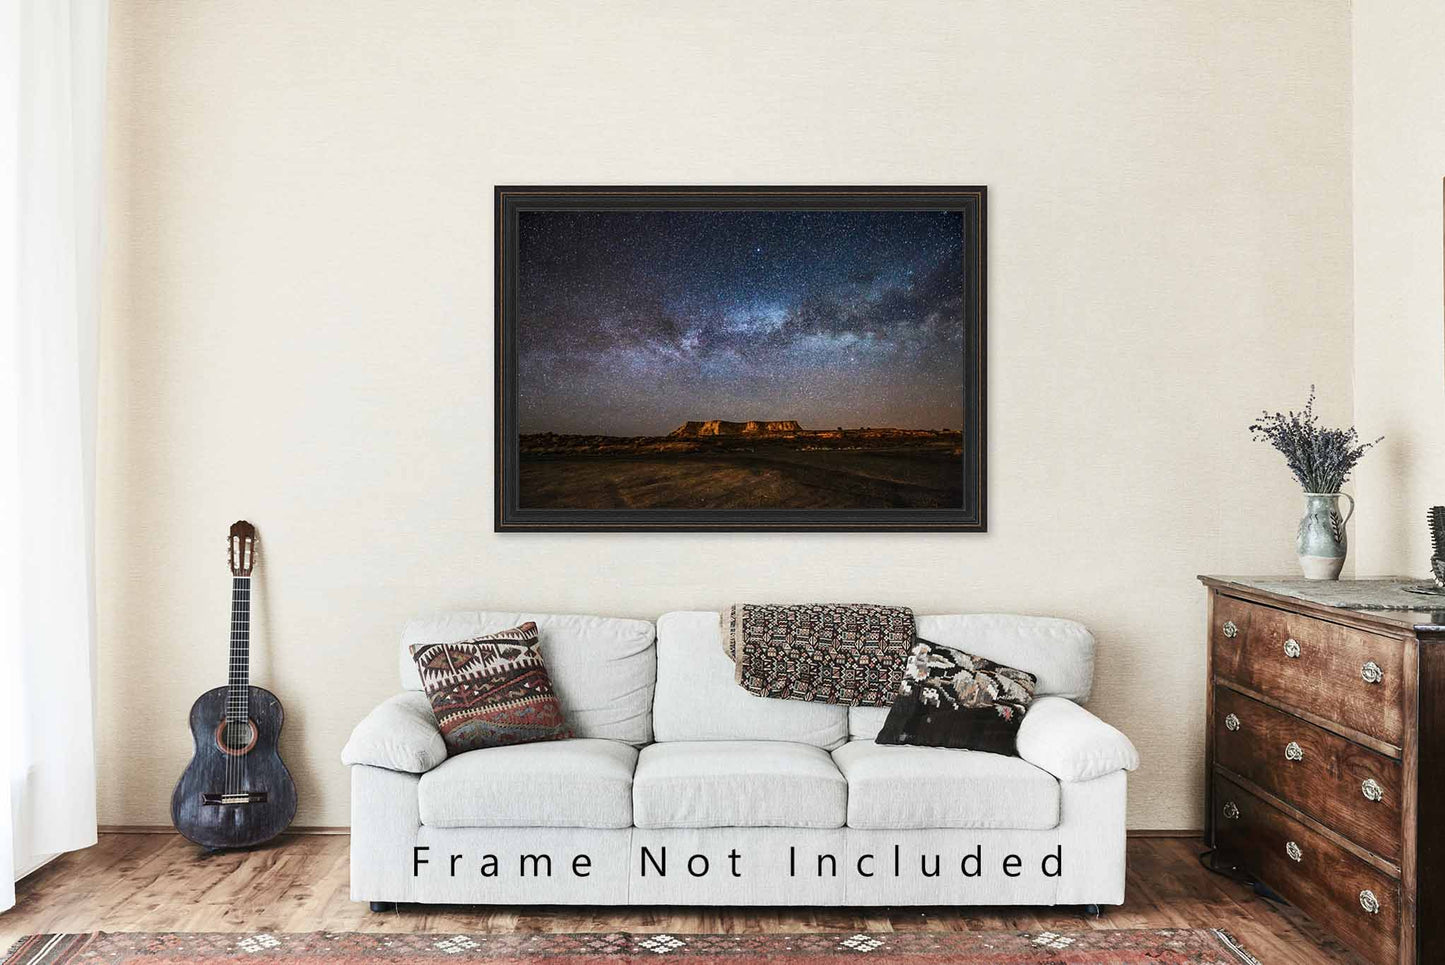 Night Sky Photography Print (Not Framed) Picture of Milky Way Spanning Horizon Over Mesa in Arizona Desert Wall Art Celestial Decor